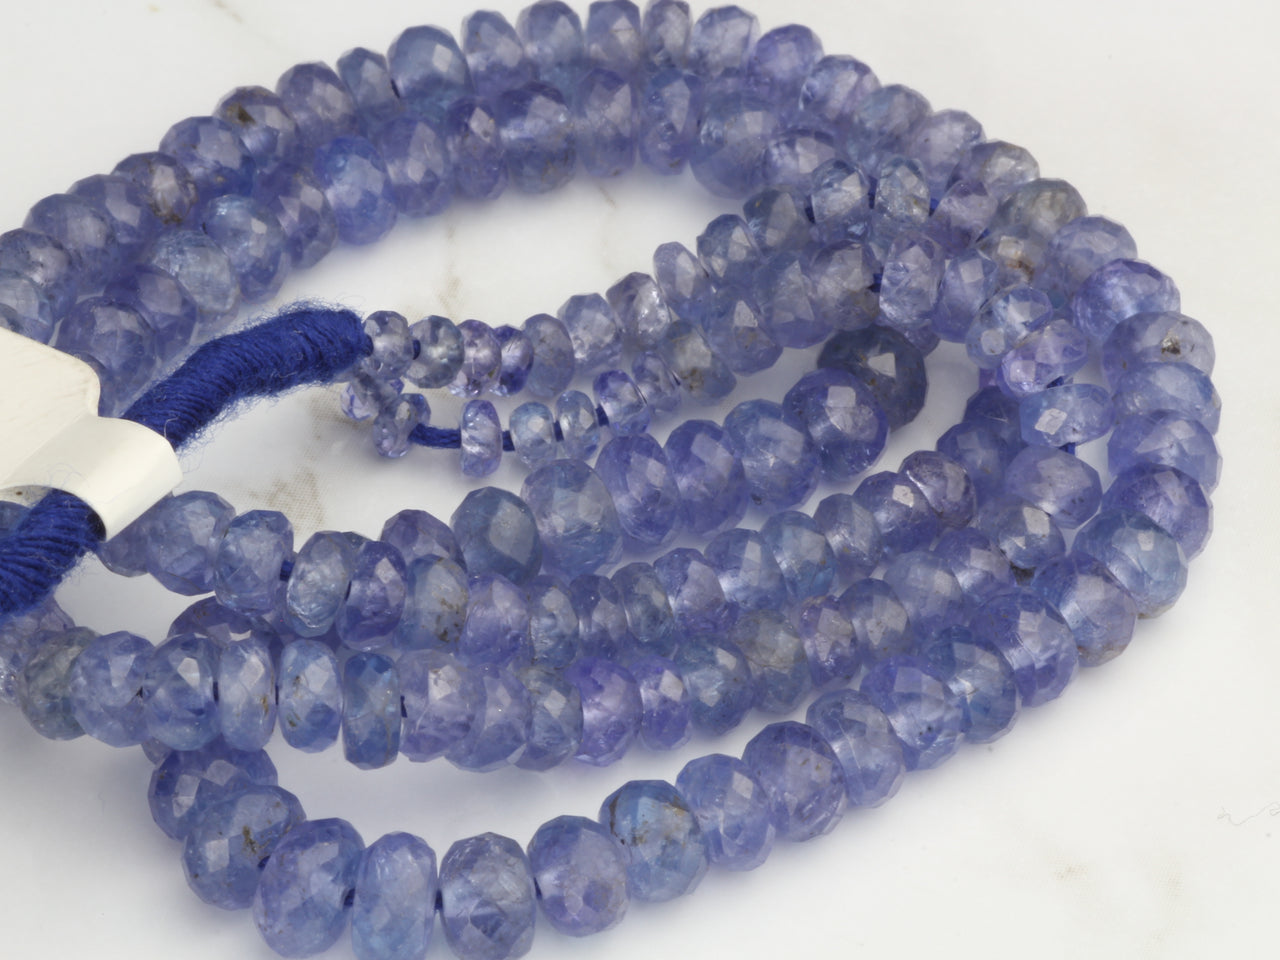 Blue Tanzanite 4mm - 5mm Hand Faceted Rondelles Bead Strand